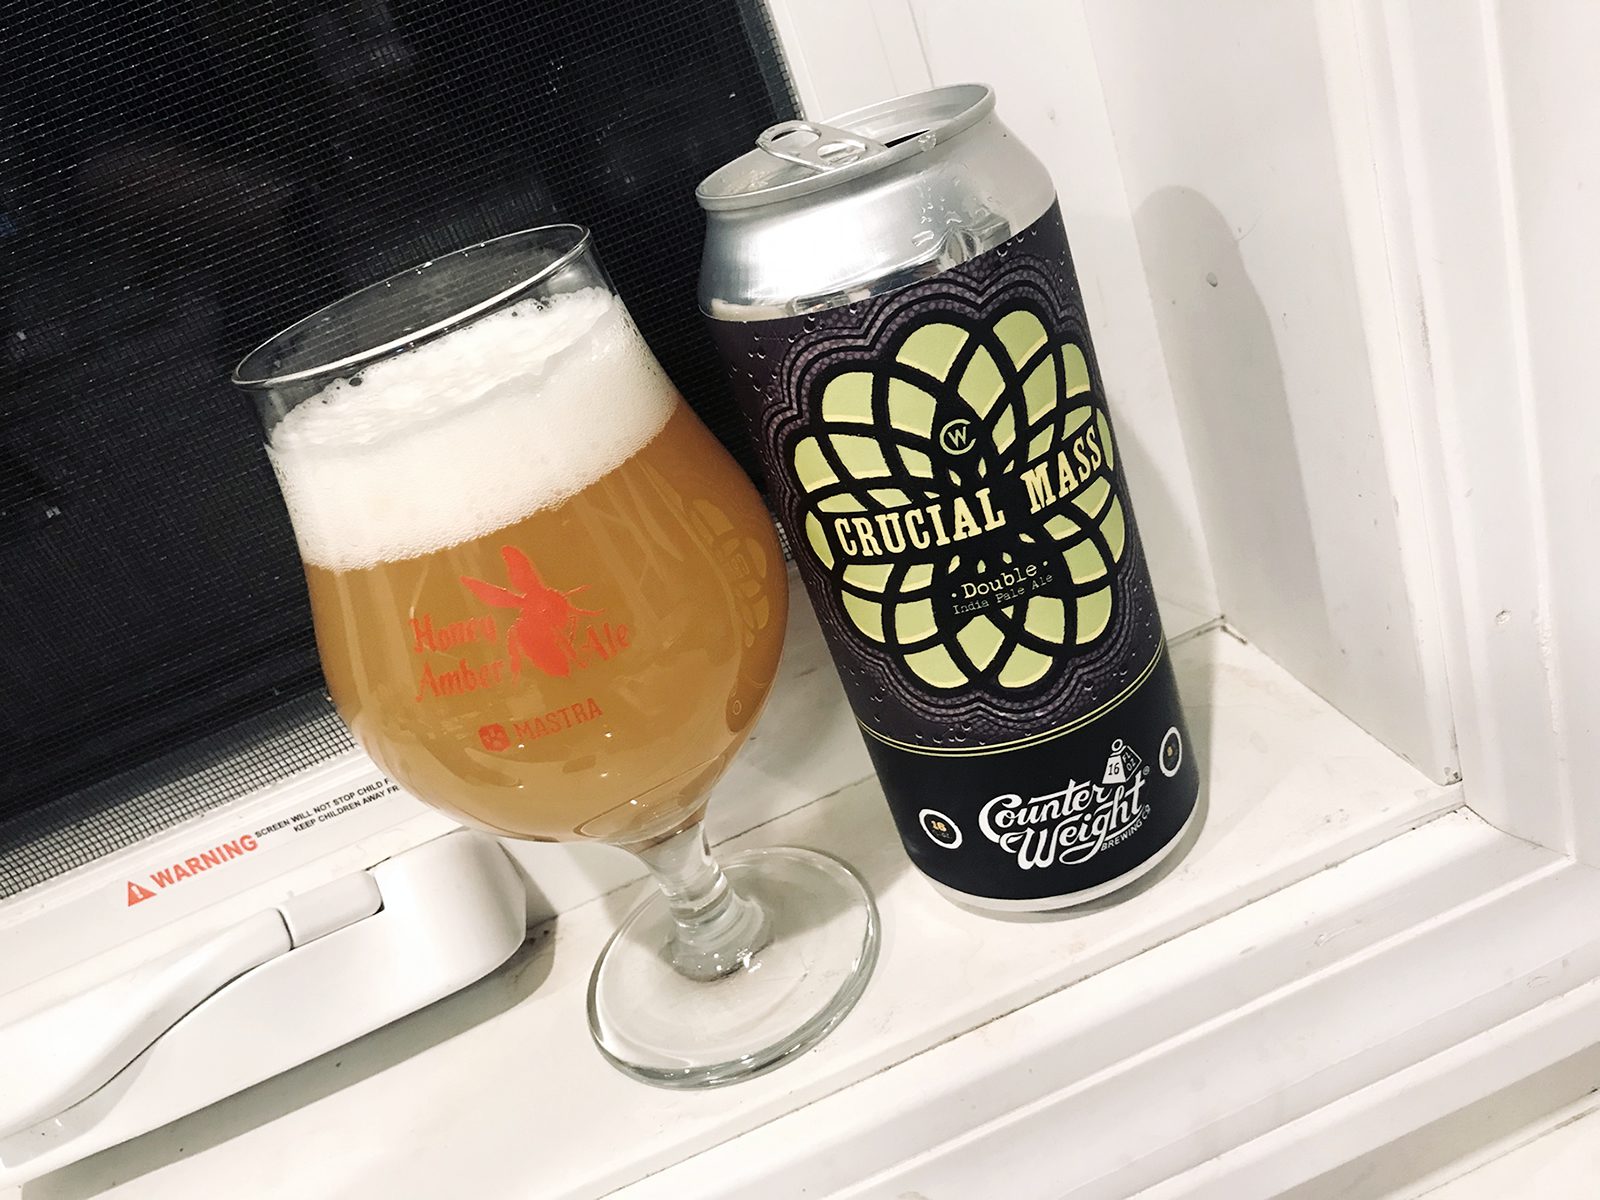 Counter Weight Brewing Company: Crucial Mass